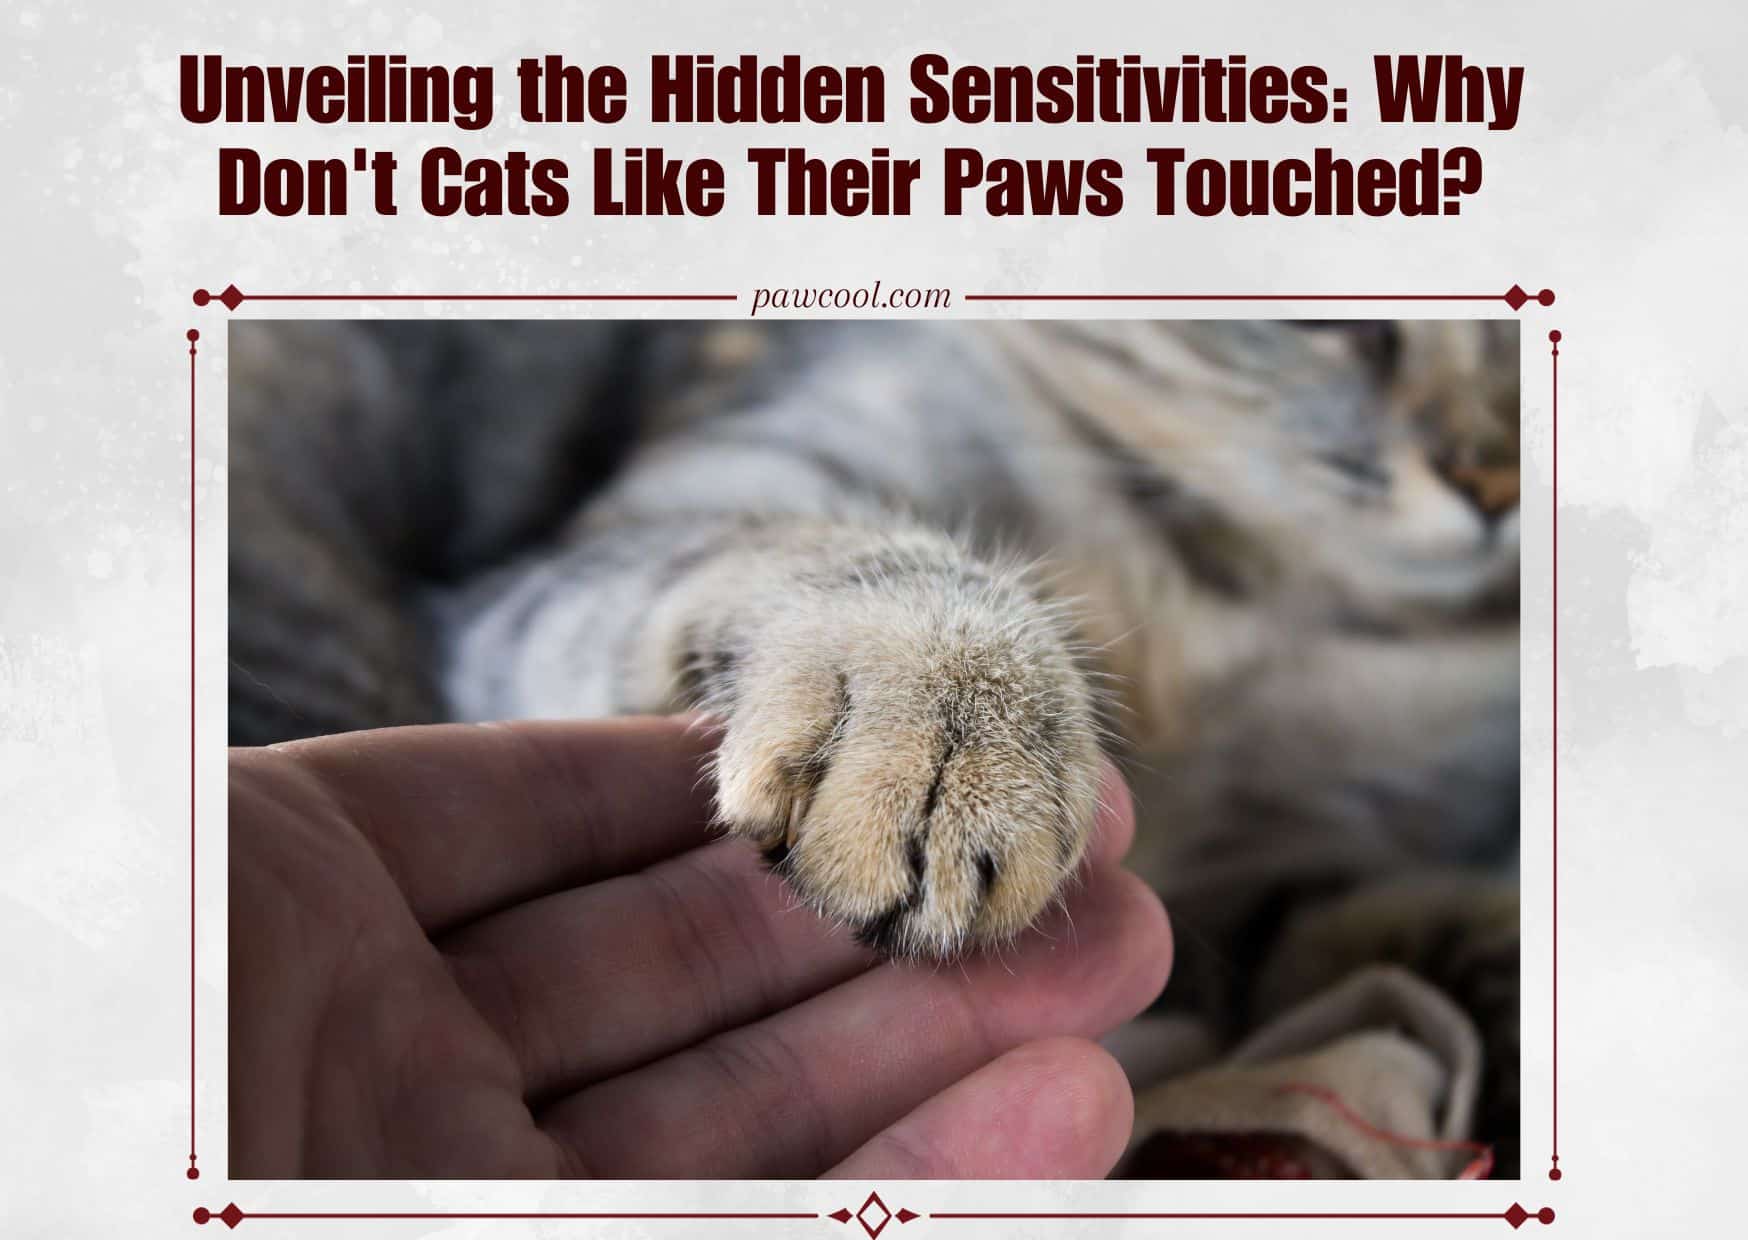 Why Don't Cats Like Their Paws Touched?